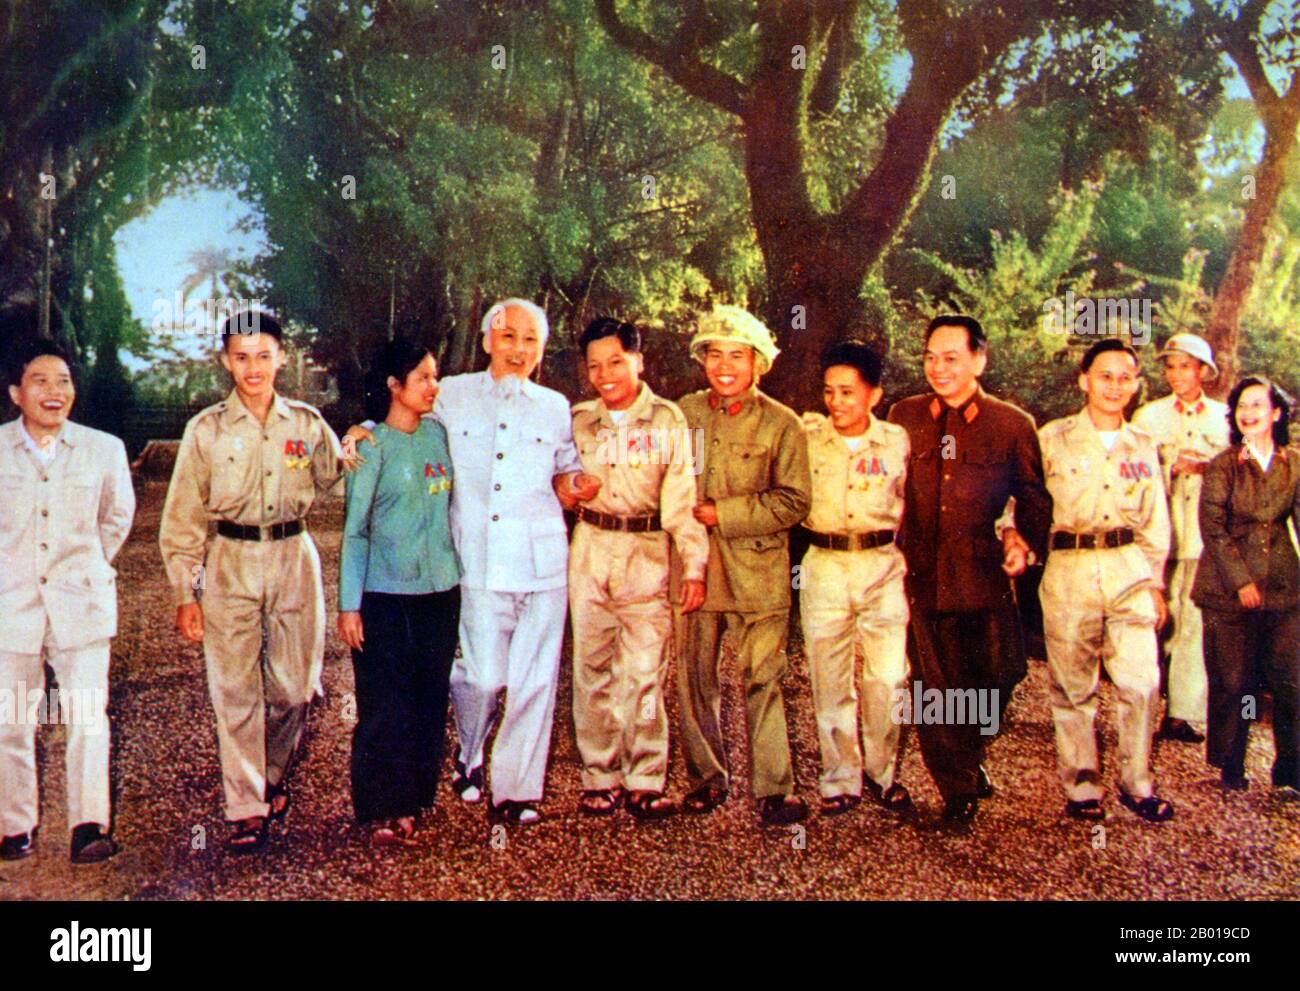 Vietnam: President Ho Chi Minh (19 May 1890 - 3 September 1969) with a group of southern Vietnamese soldiers, c. 1965.  Hồ Chí Minh, born Nguyễn Sinh Cung and also known as Nguyễn Ái Quốc was a Vietnamese Communist revolutionary leader who was prime minister (1946-1955) and president (1945-1969) of the Democratic Republic of Vietnam (North Vietnam). He formed the Democratic Republic of Vietnam and led the Viet Cong during the Vietnam War until his death. Stock Photo